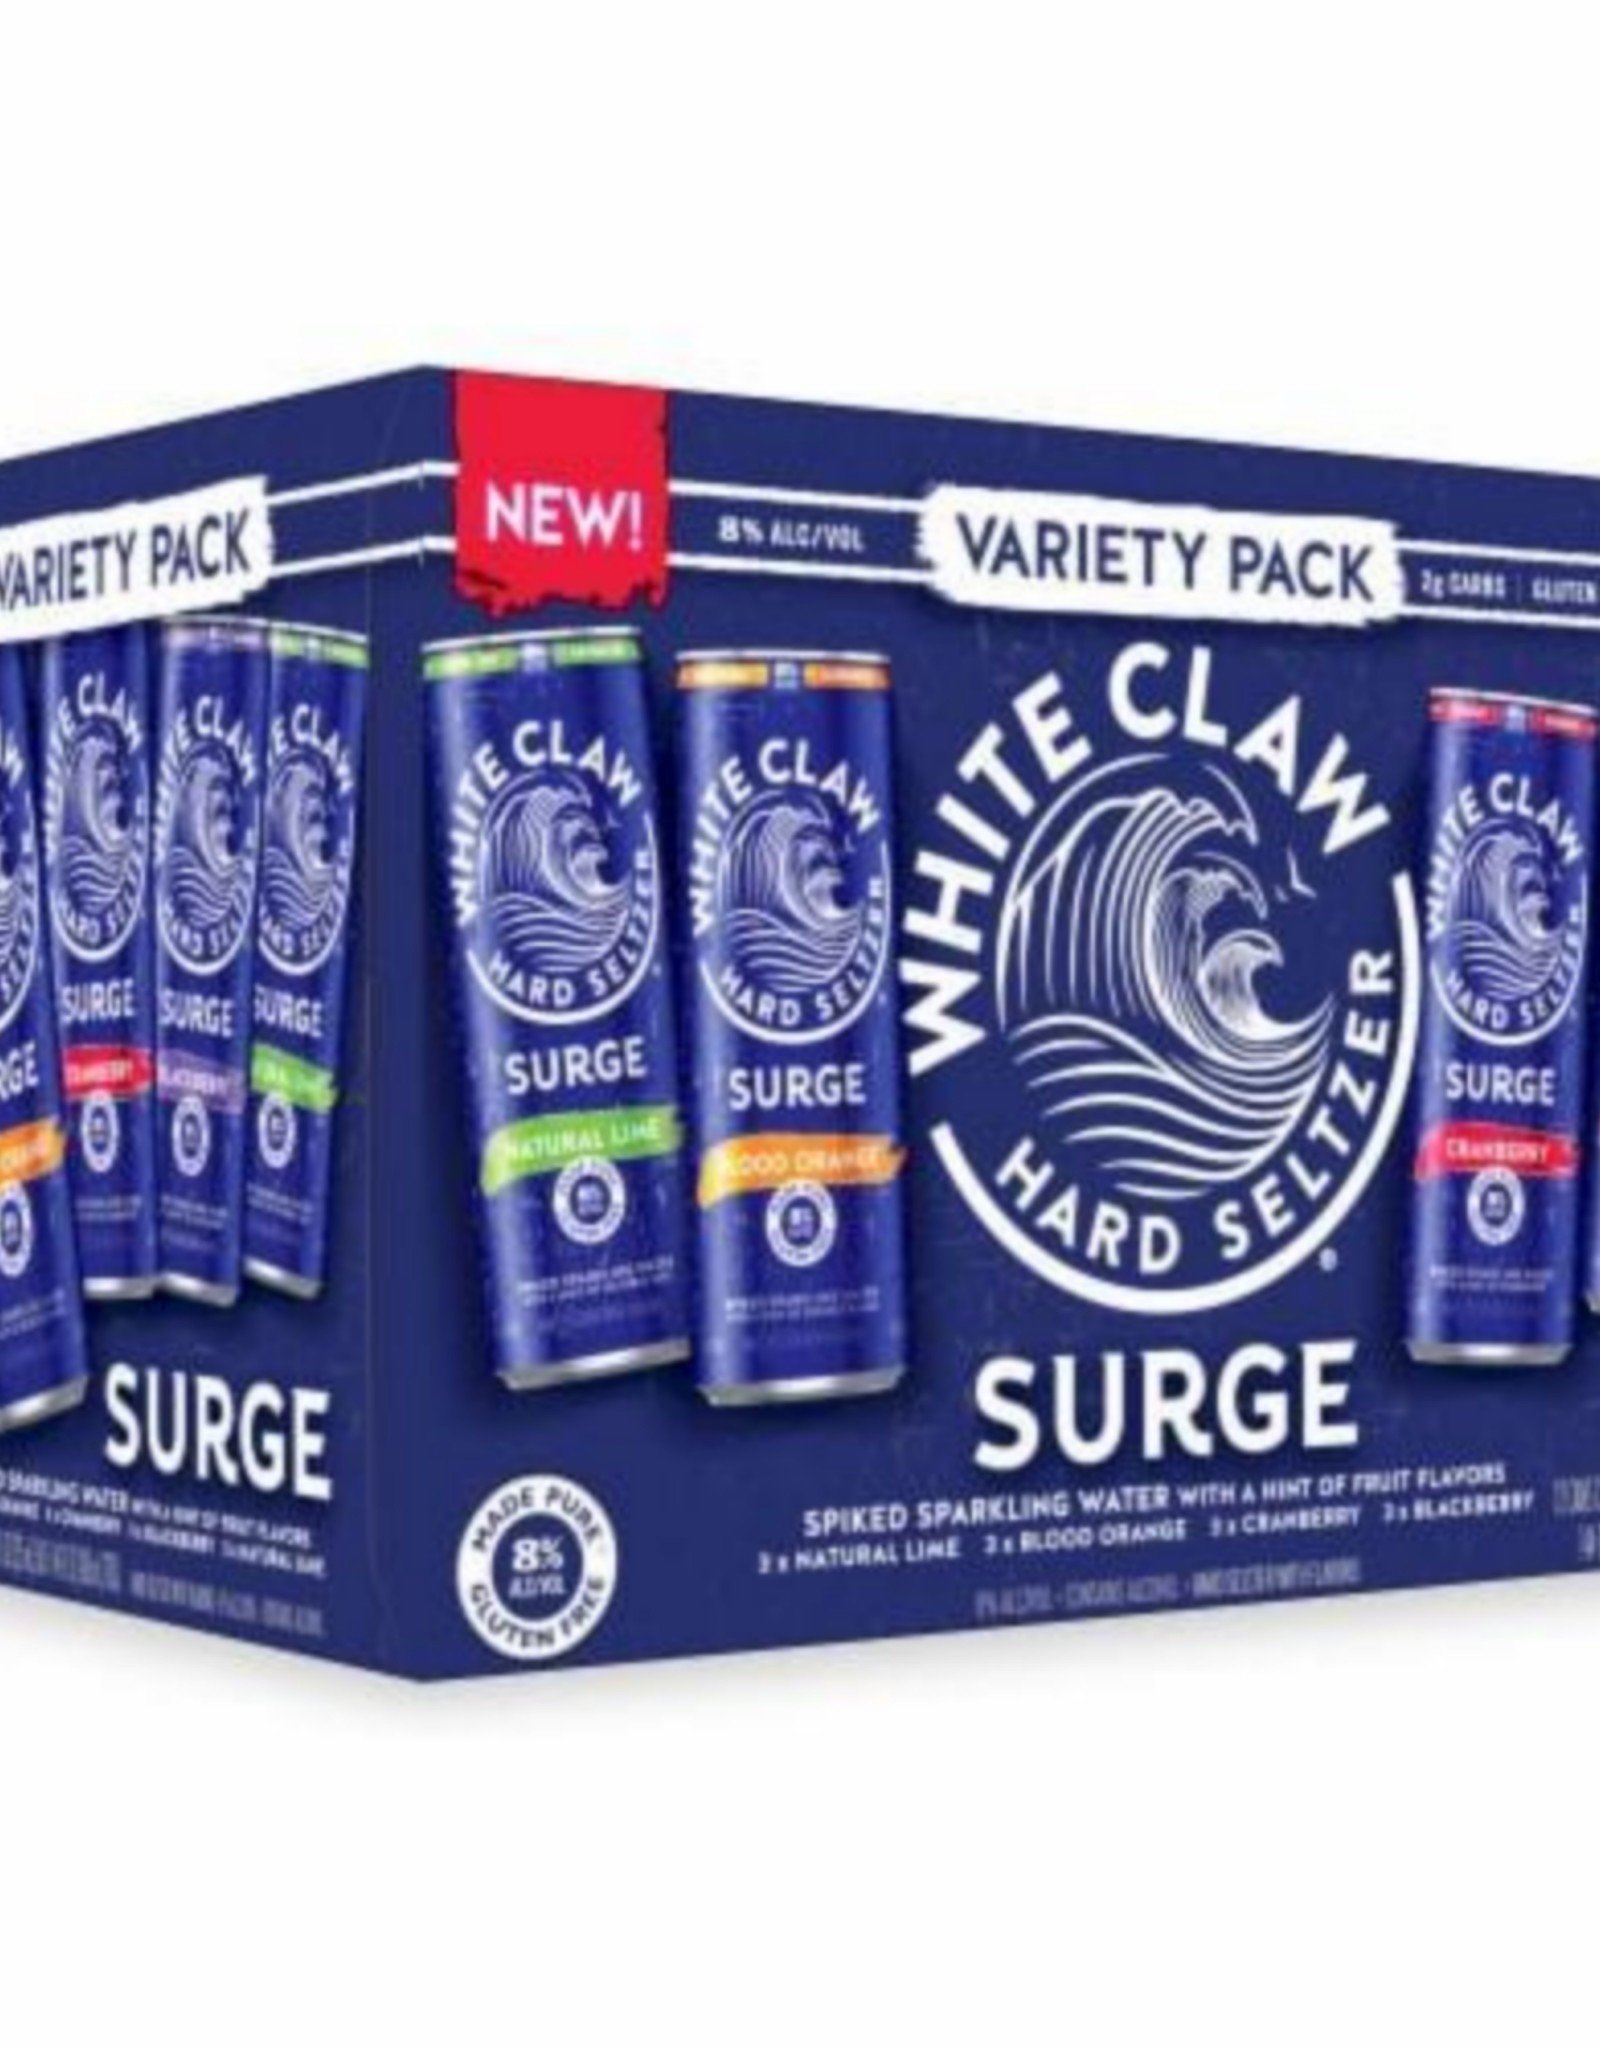 White Claw White Claw - Surge - Variety - 12pk - 12oz - Cans